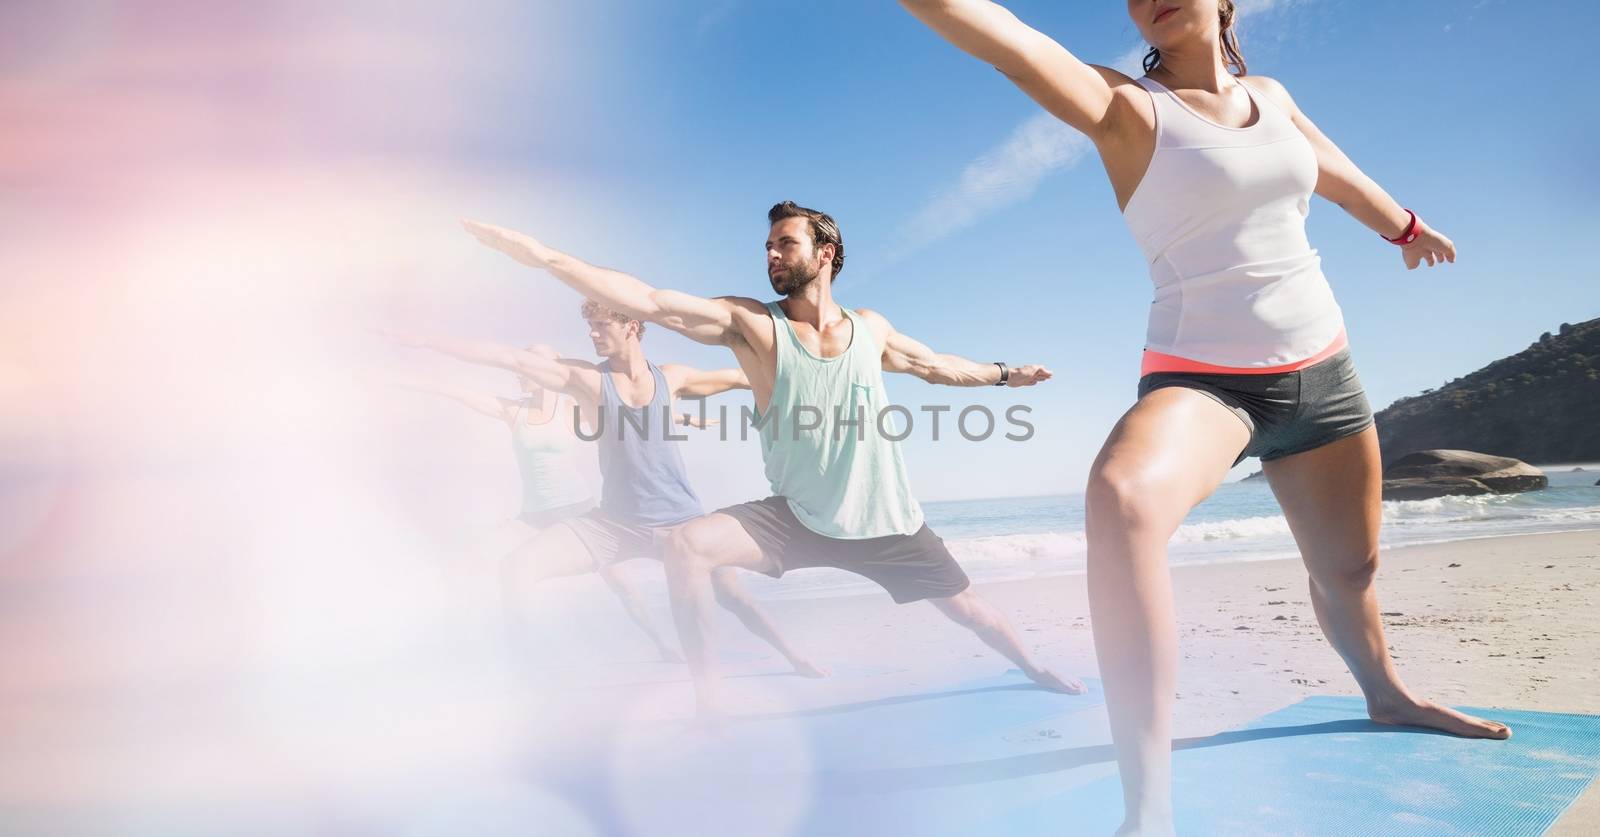 Digital composite of People exercising at beach